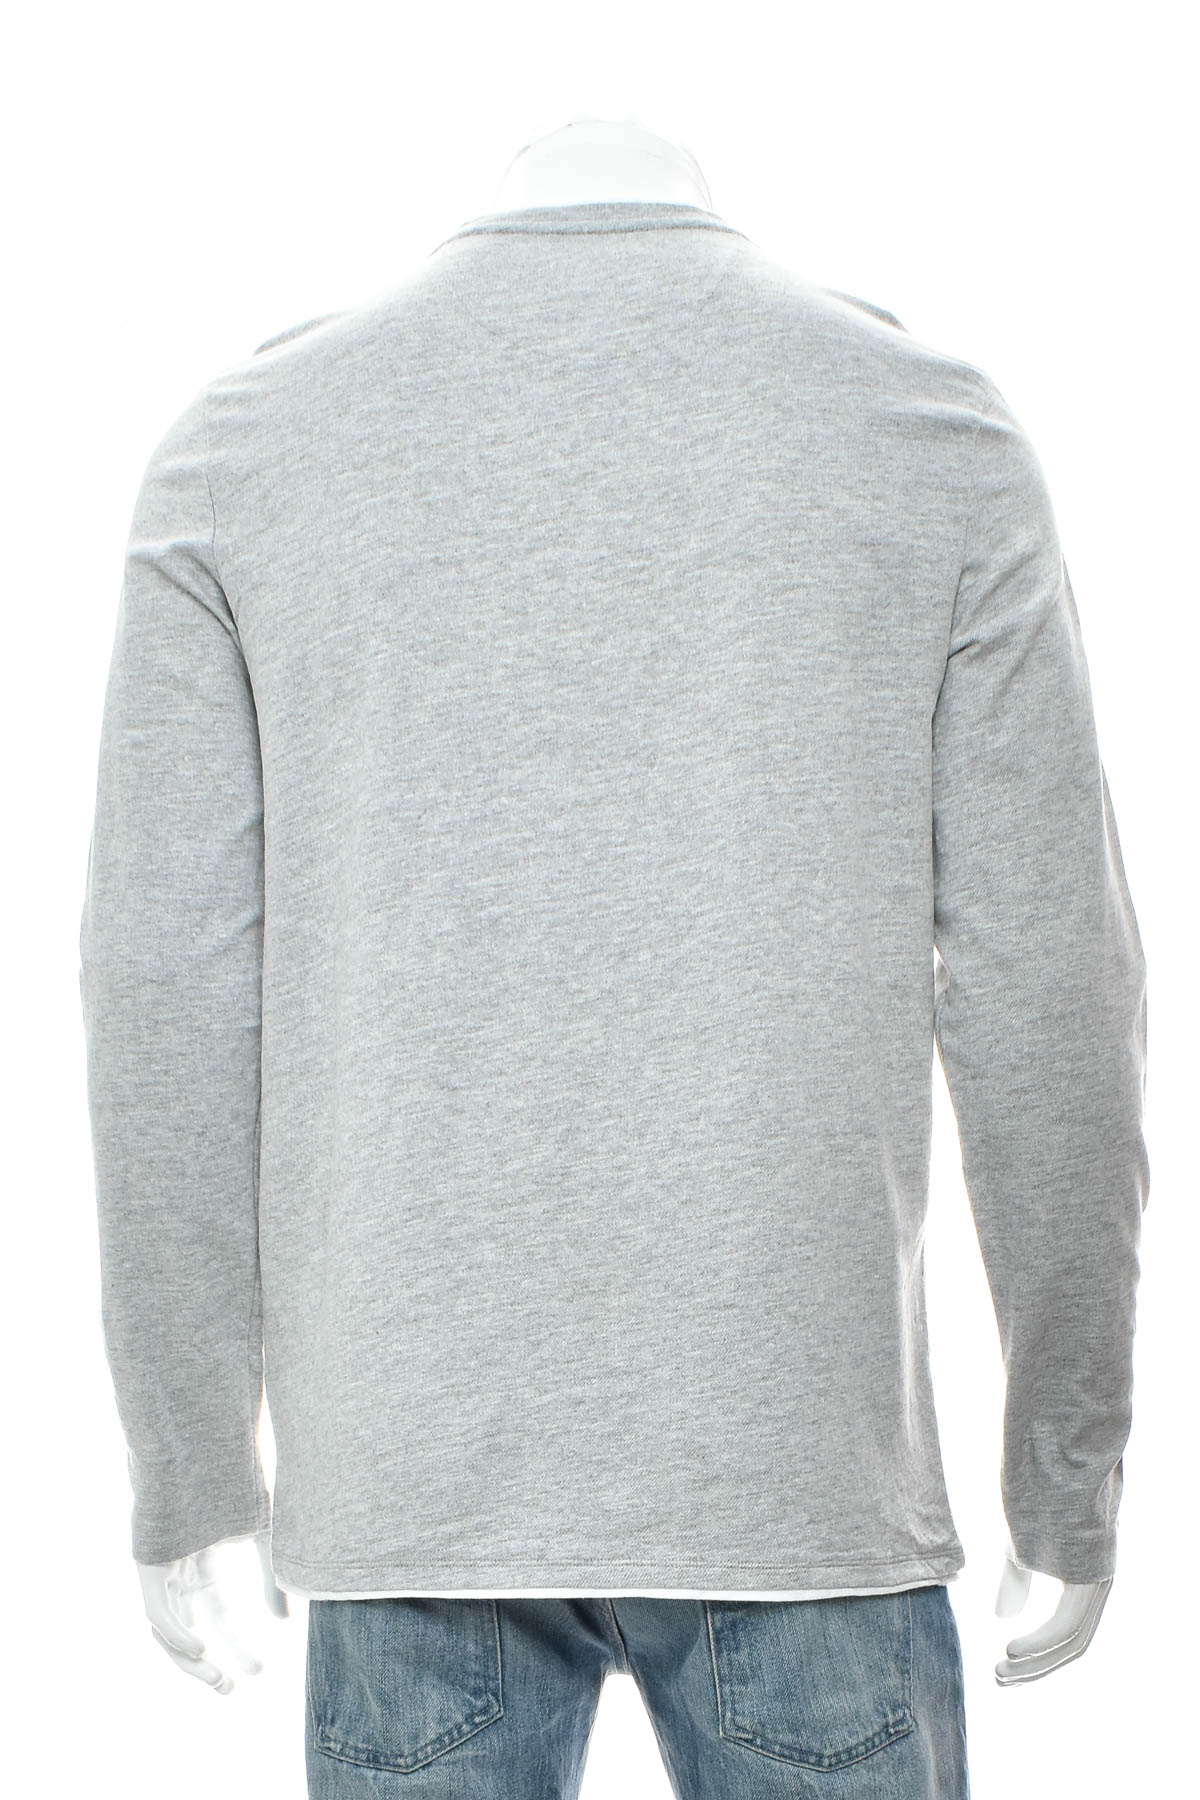 Men's sweater - RESERVED - 1